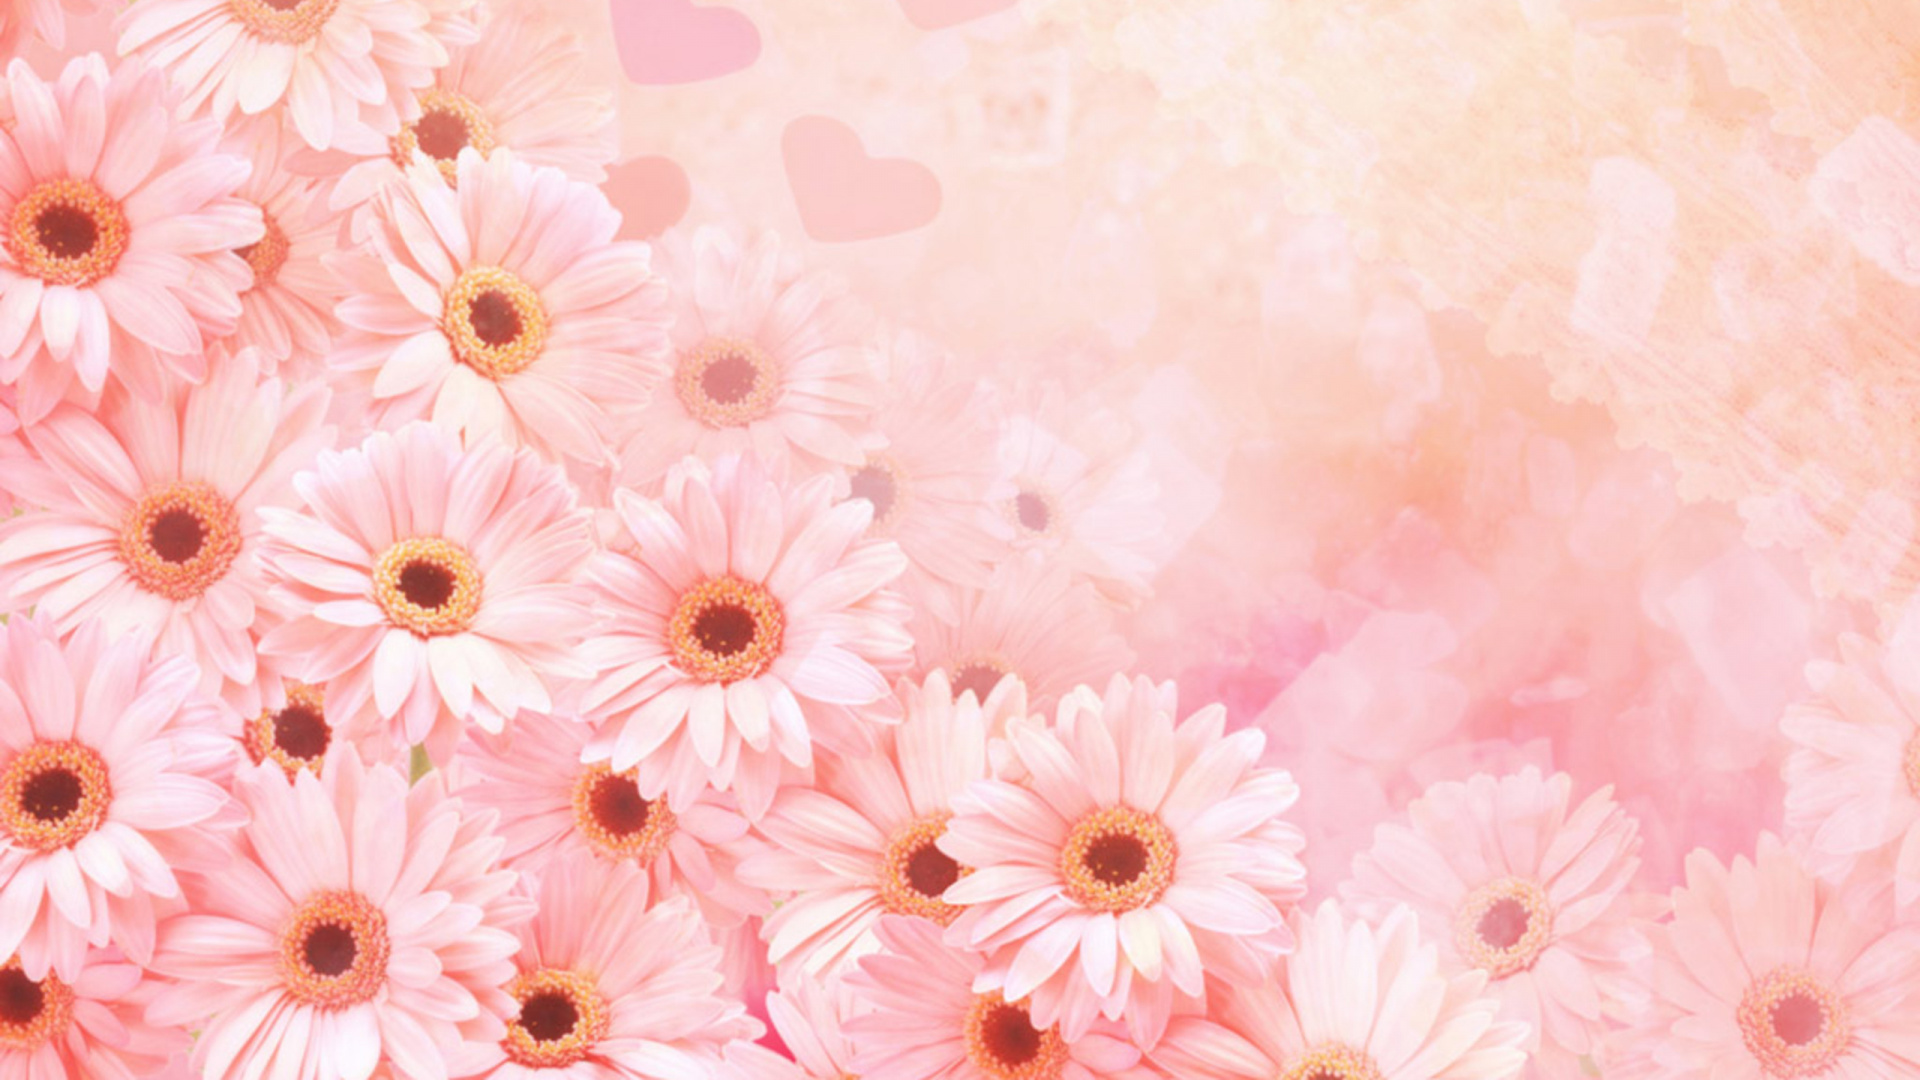 Pink and White Floral Textile. Wallpaper in 1920x1080 Resolution